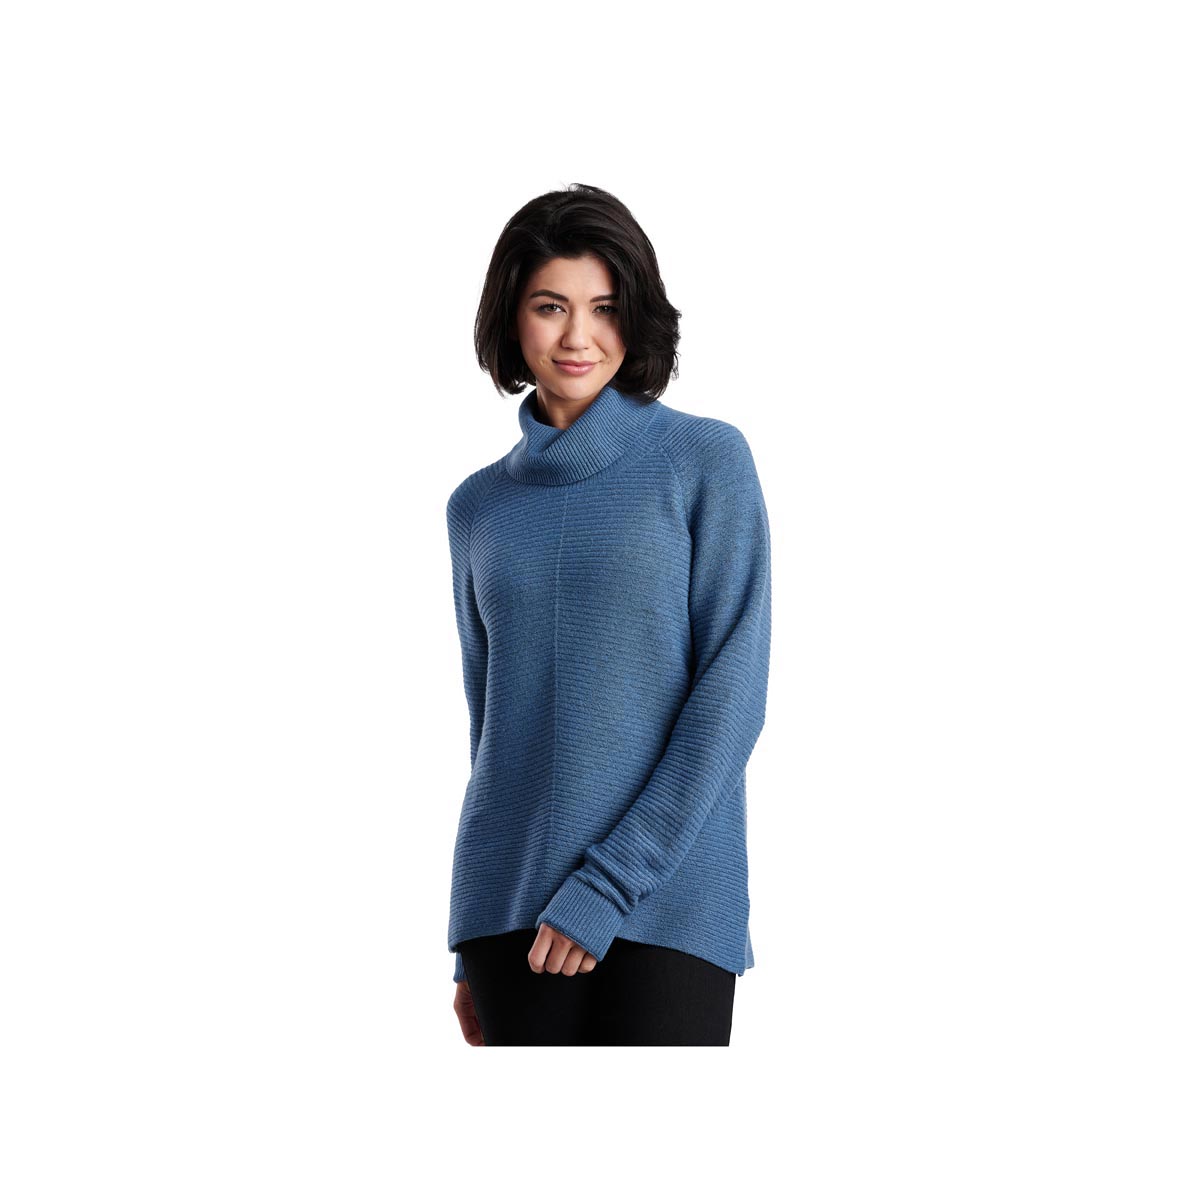 Women's Kuhl Solace Pullover Sweater